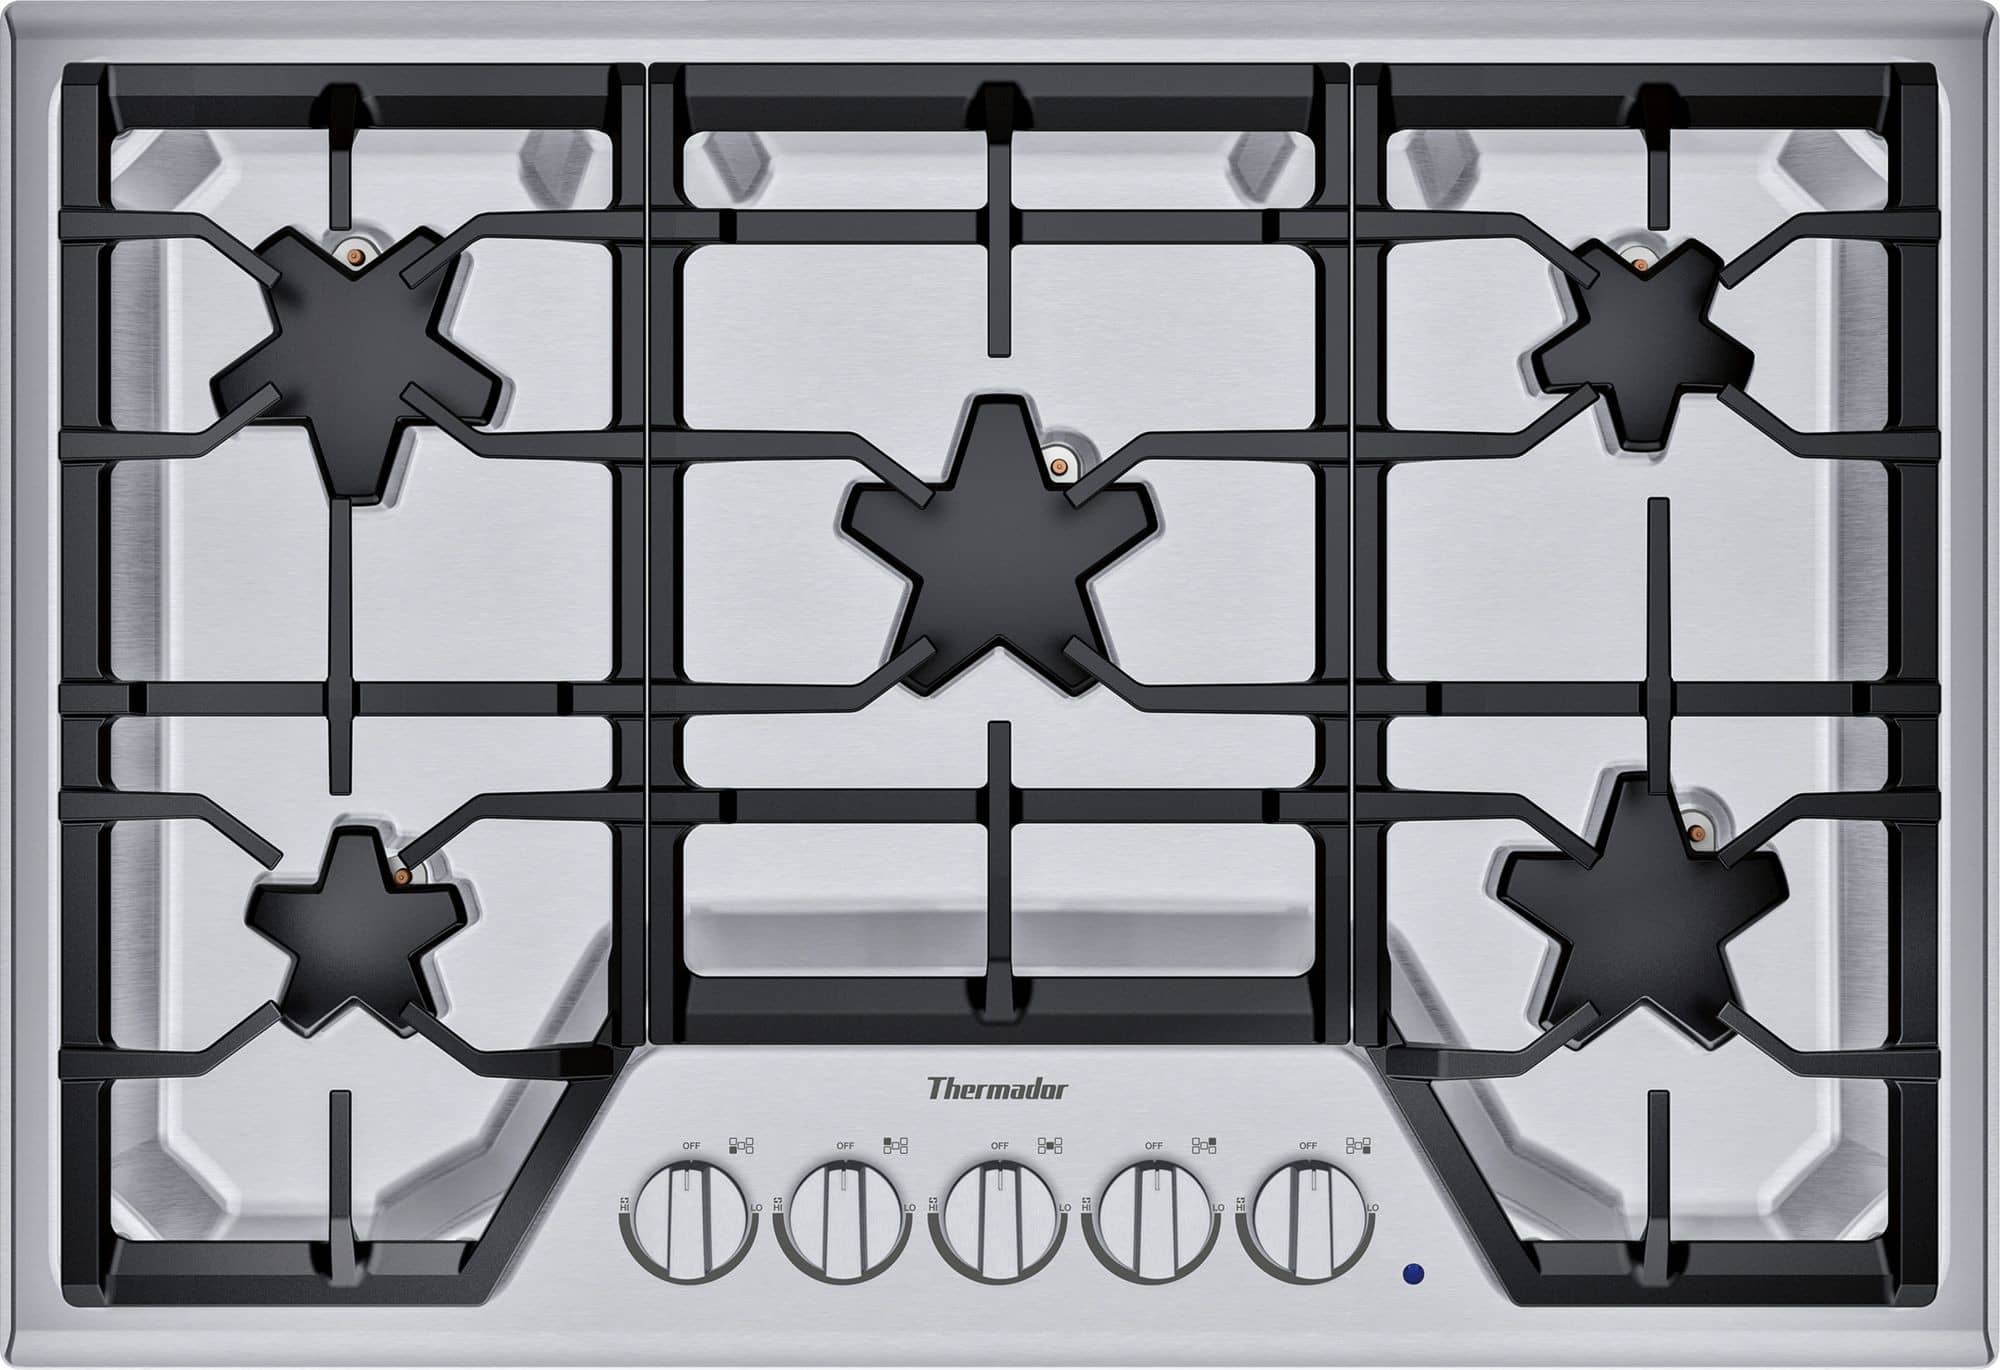 thermador-sgs305ts-30-inch-master-series-gas-cooktop-with-metal-knobs